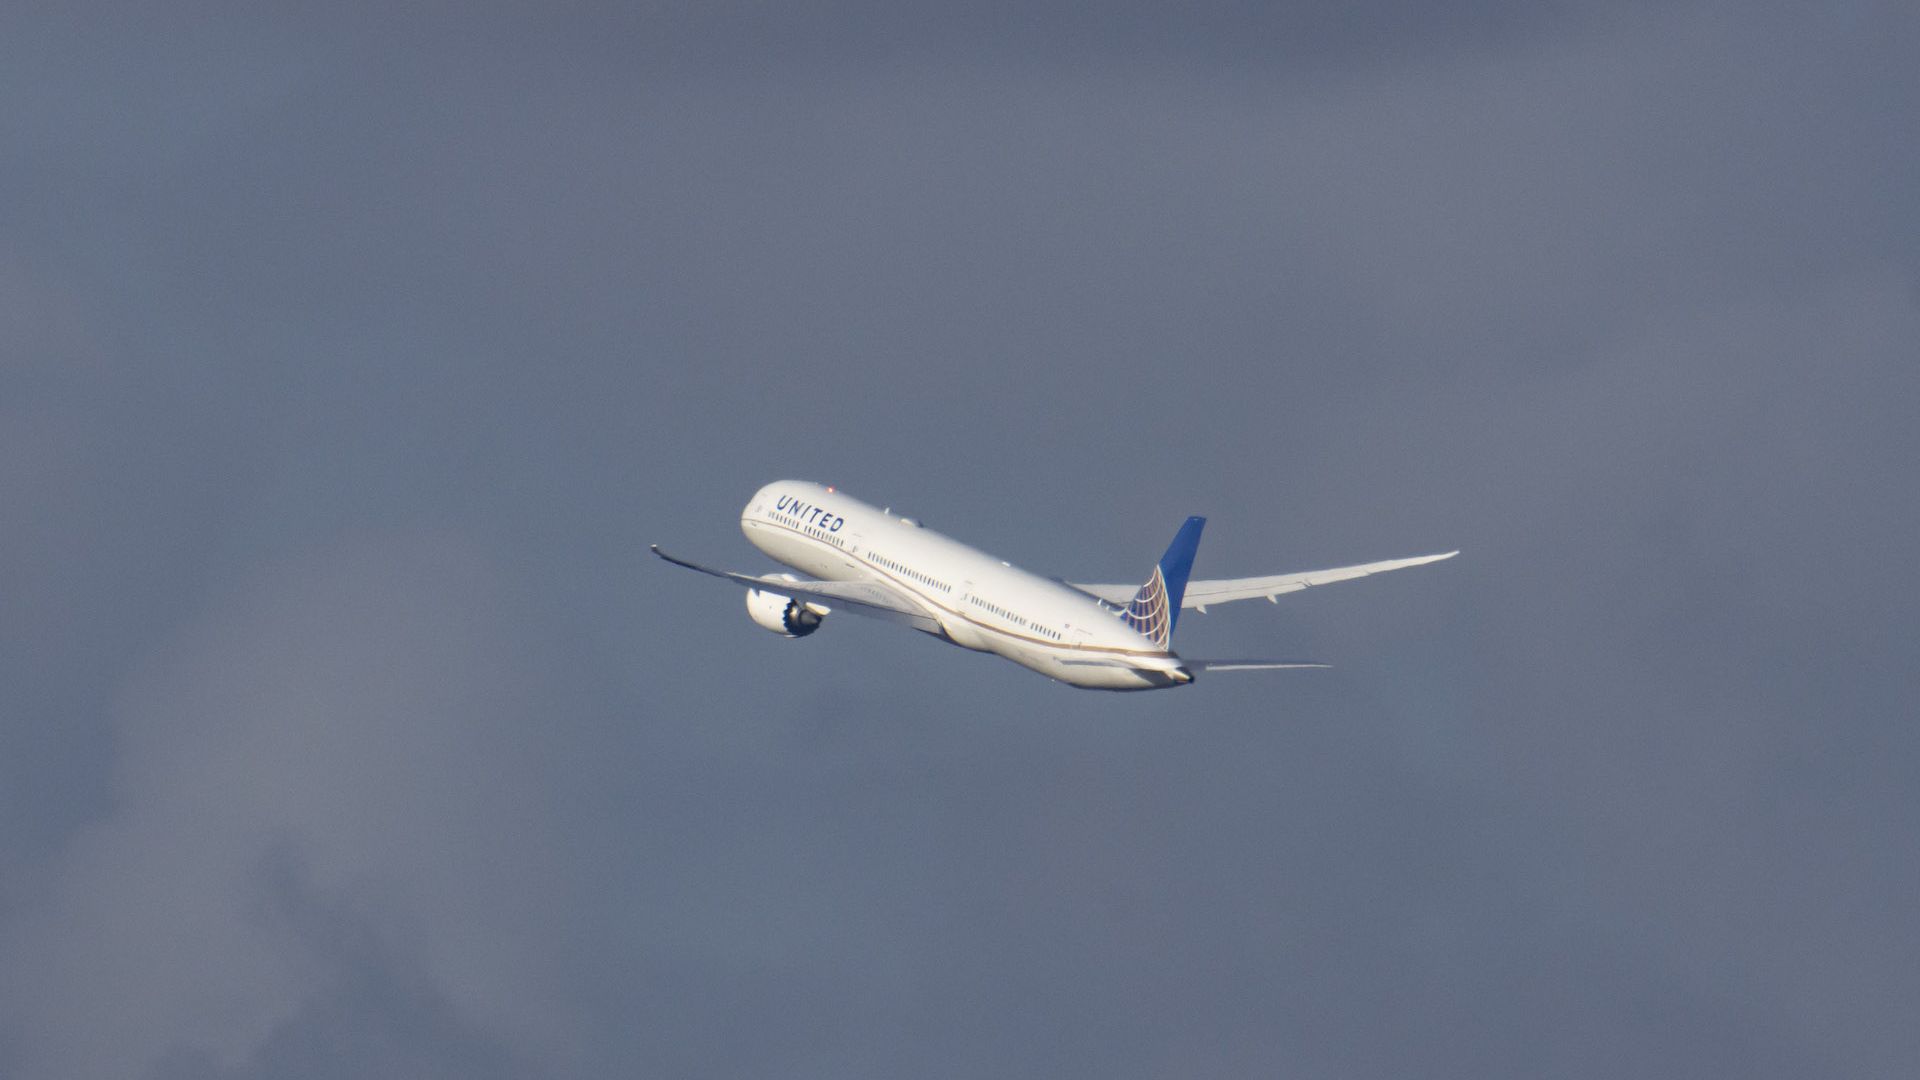 United Airlines Boeing 787-10 takes off.